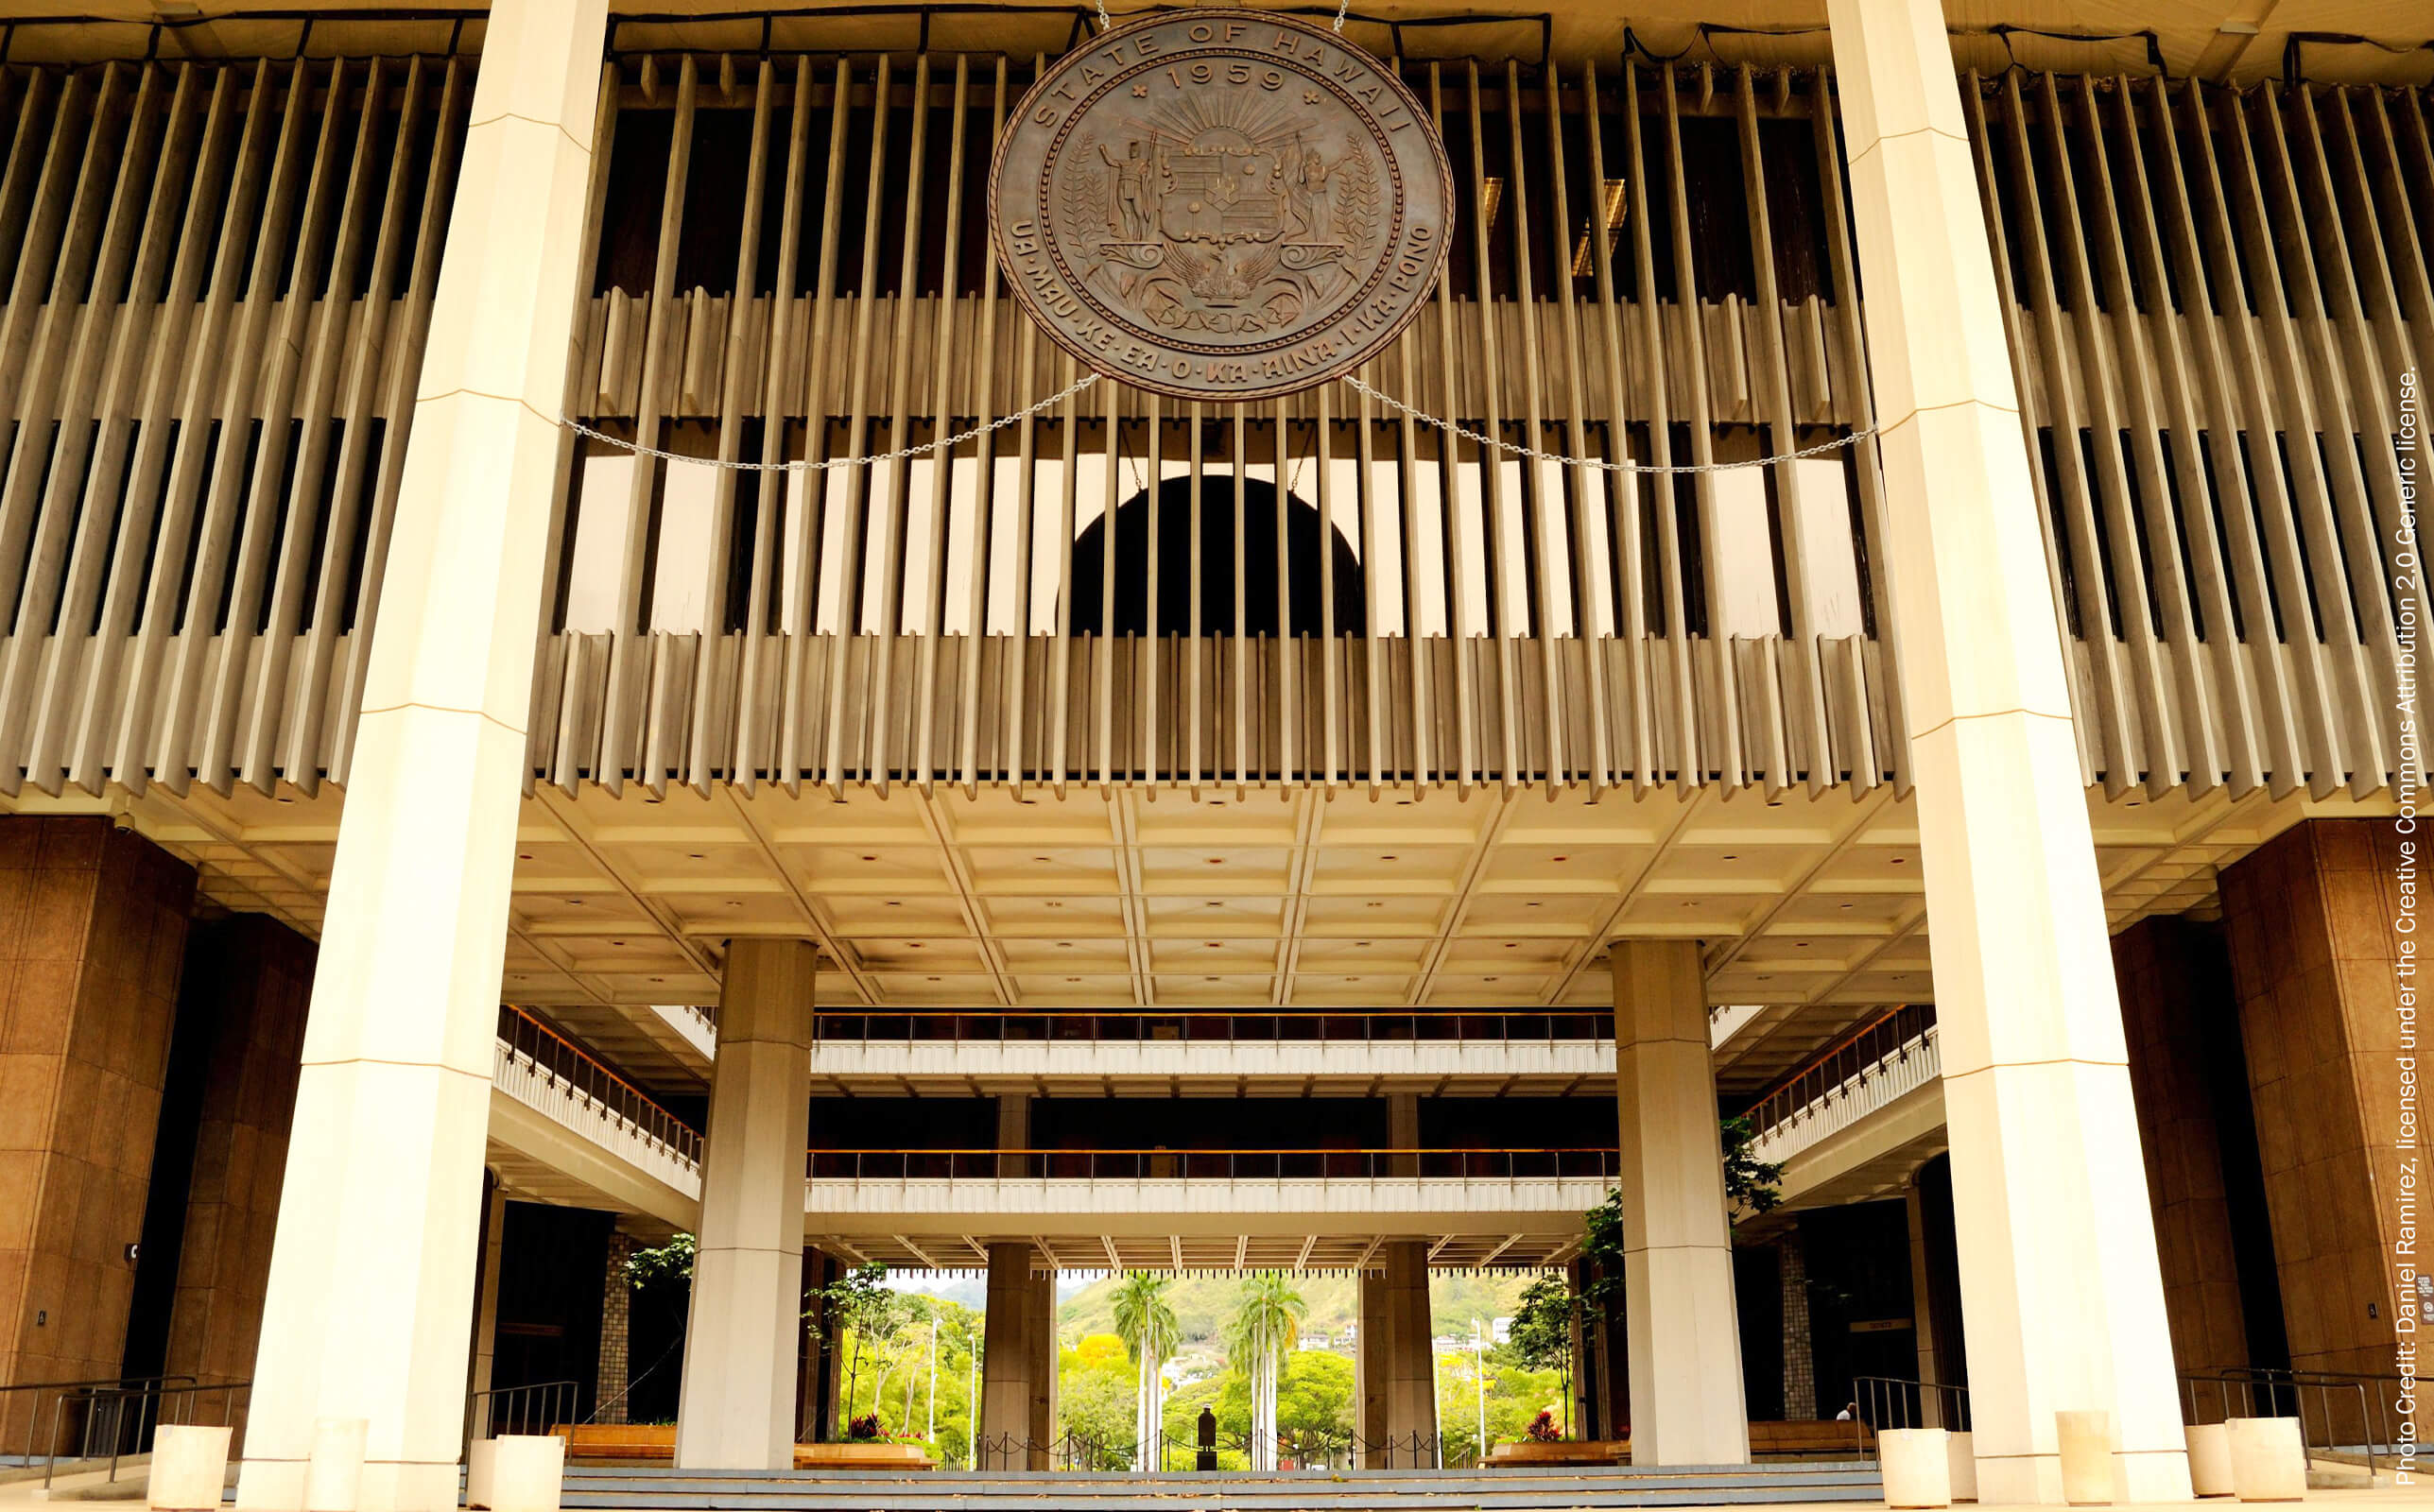 Hawaii State Capitol (Photo Credit: Daniel Ramirez, licensed under the Creative Commons Attribution 2.0 Generic license.)